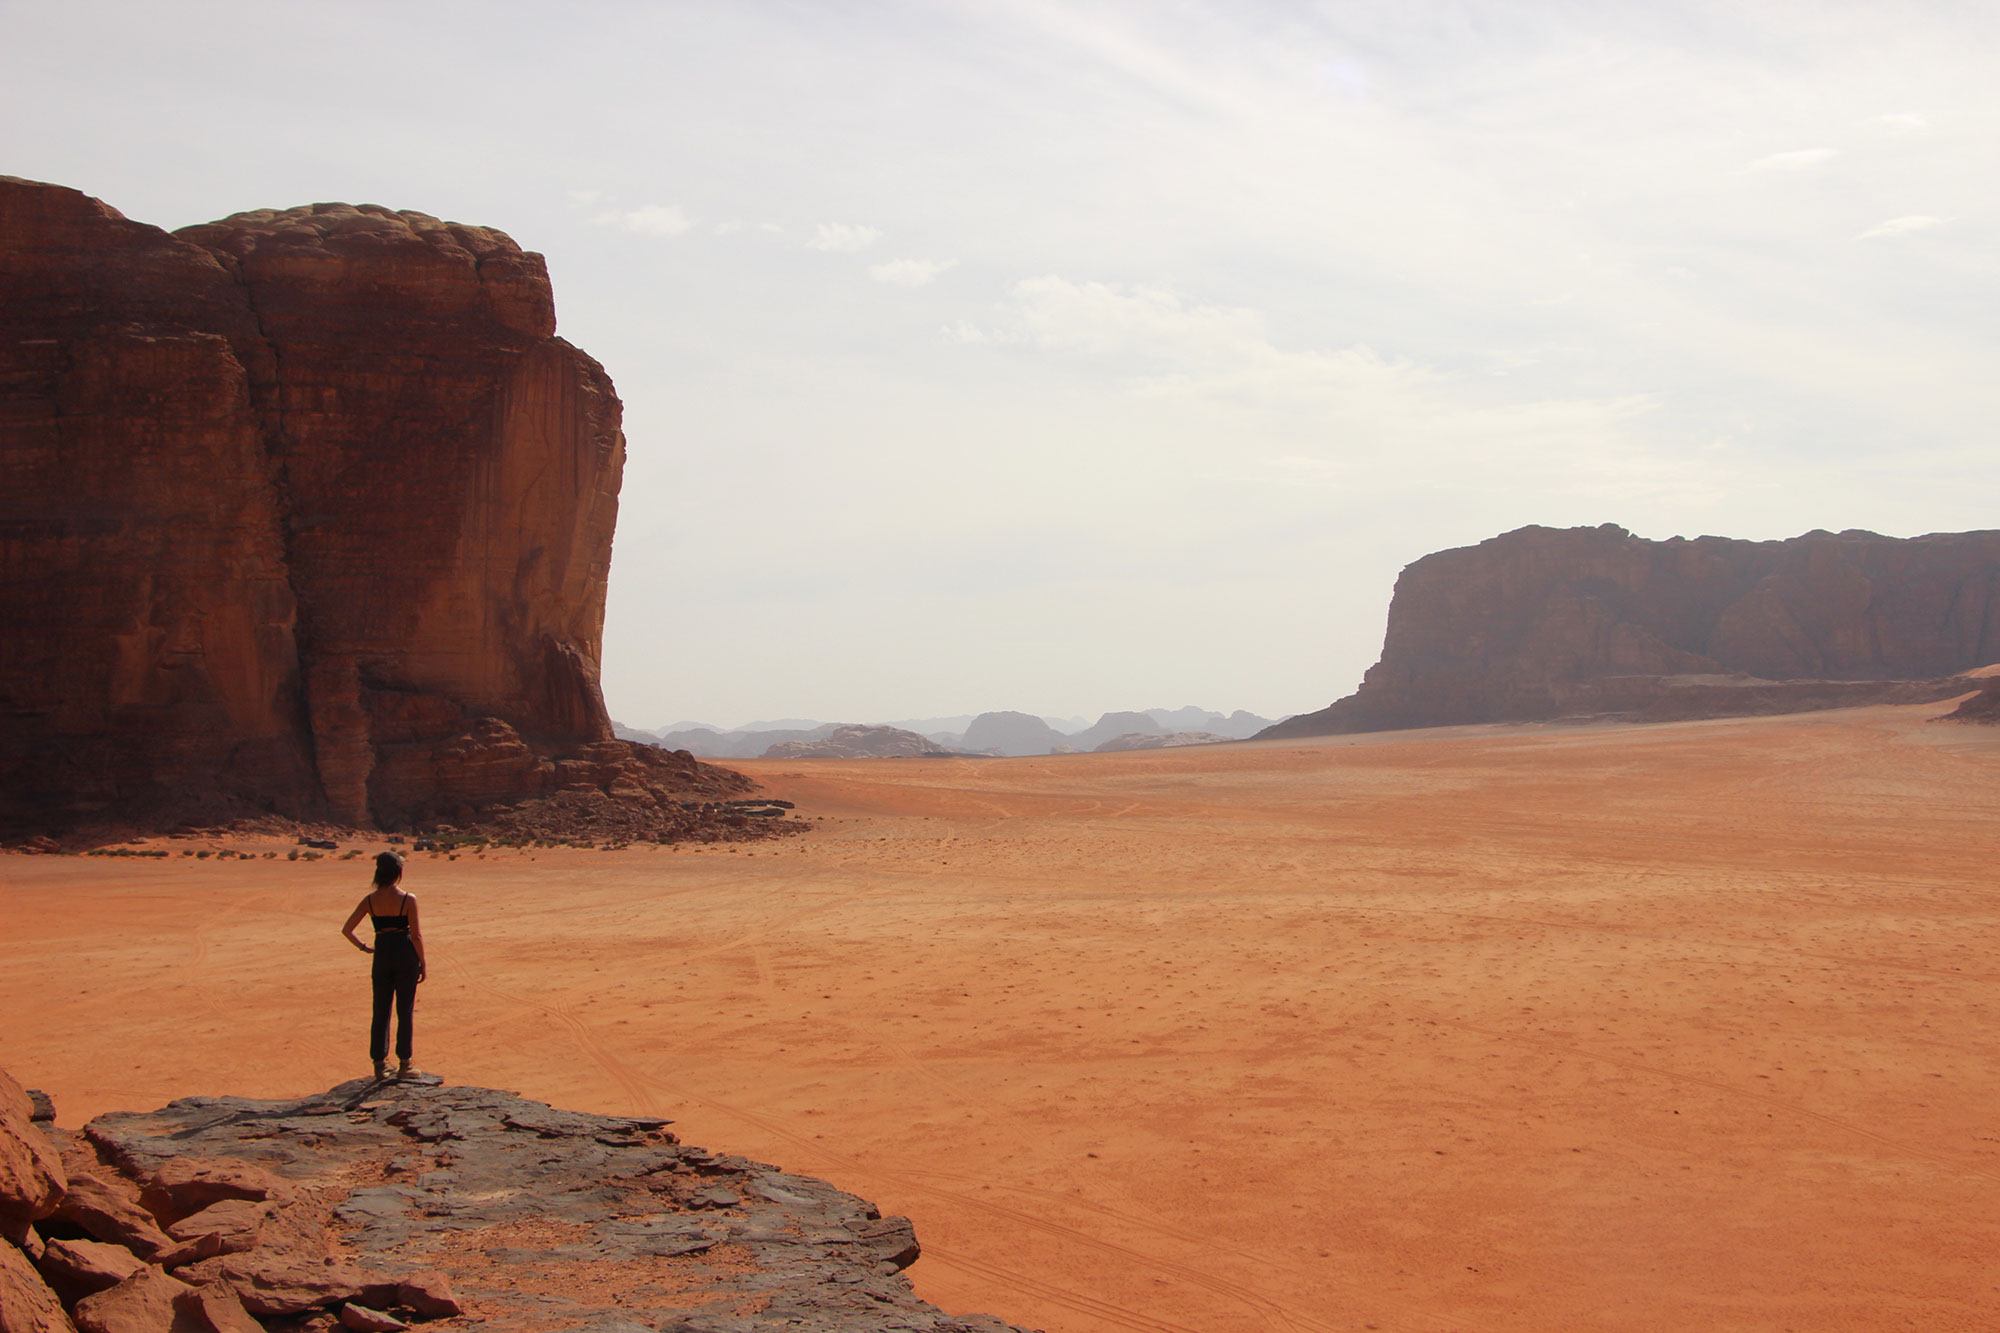 Looking out over the red sands of Wadi Rum in Jordan